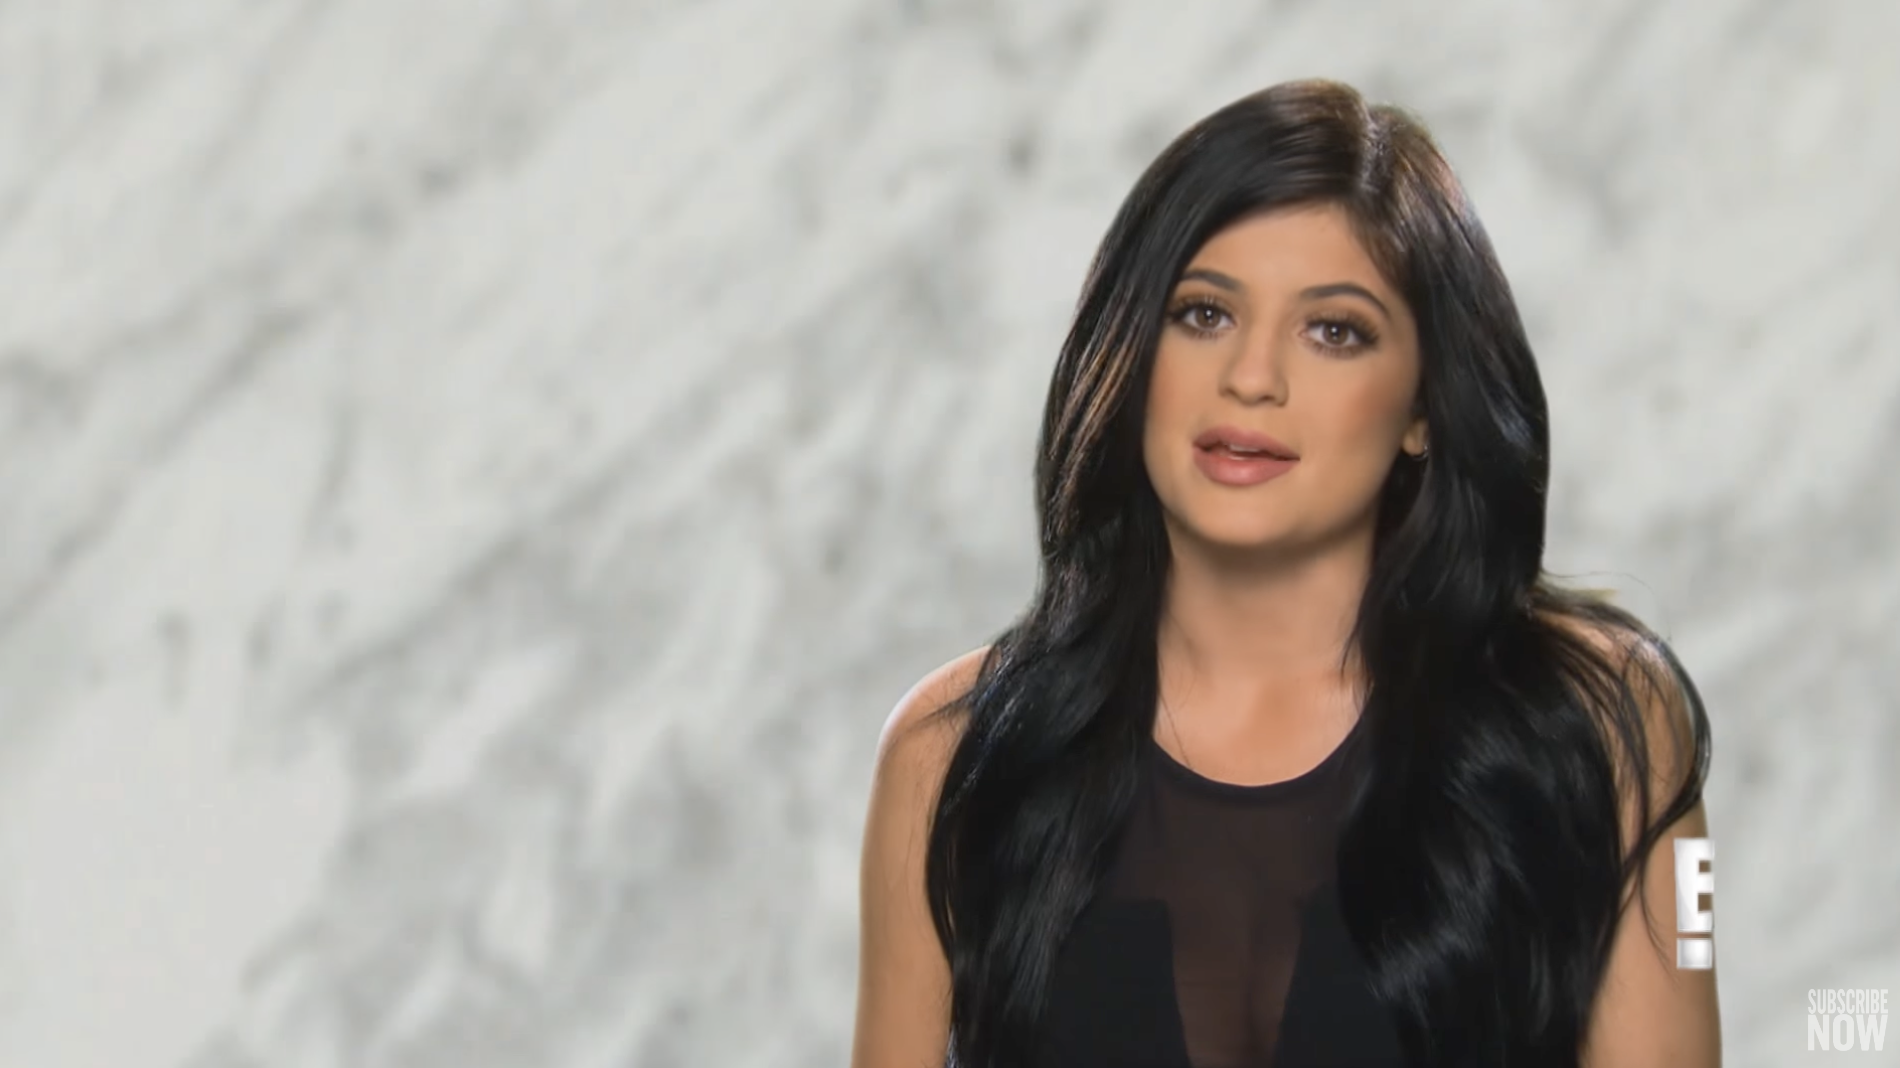 An interview shot of Kylie on &#x27;Keeping Up&#x27; speaking to the camera in front of a marble background